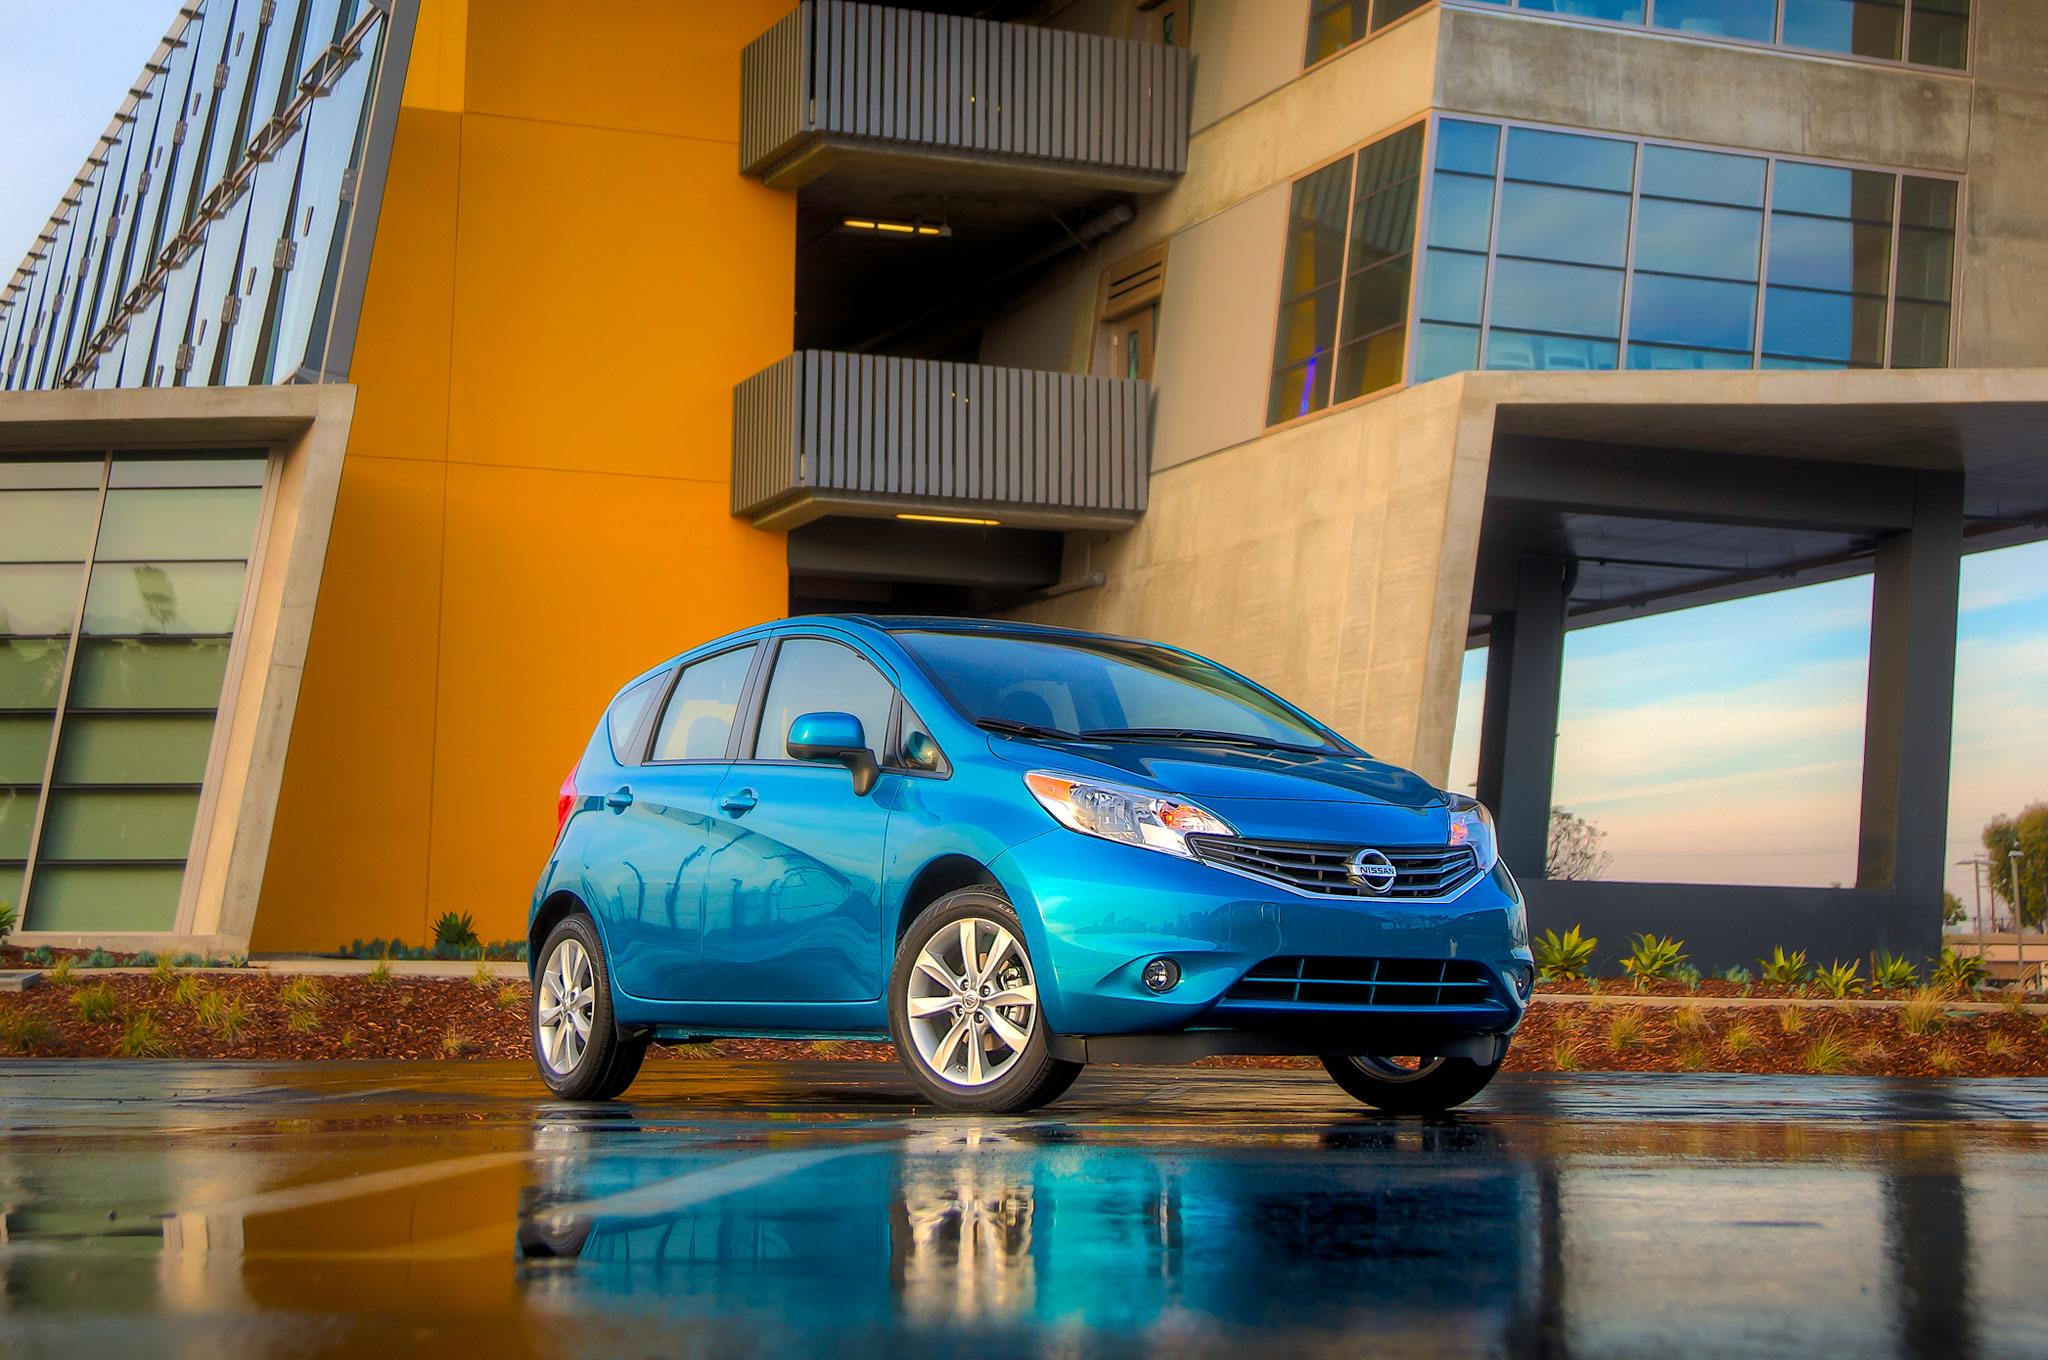 2014 Nissan Versa Note Front View